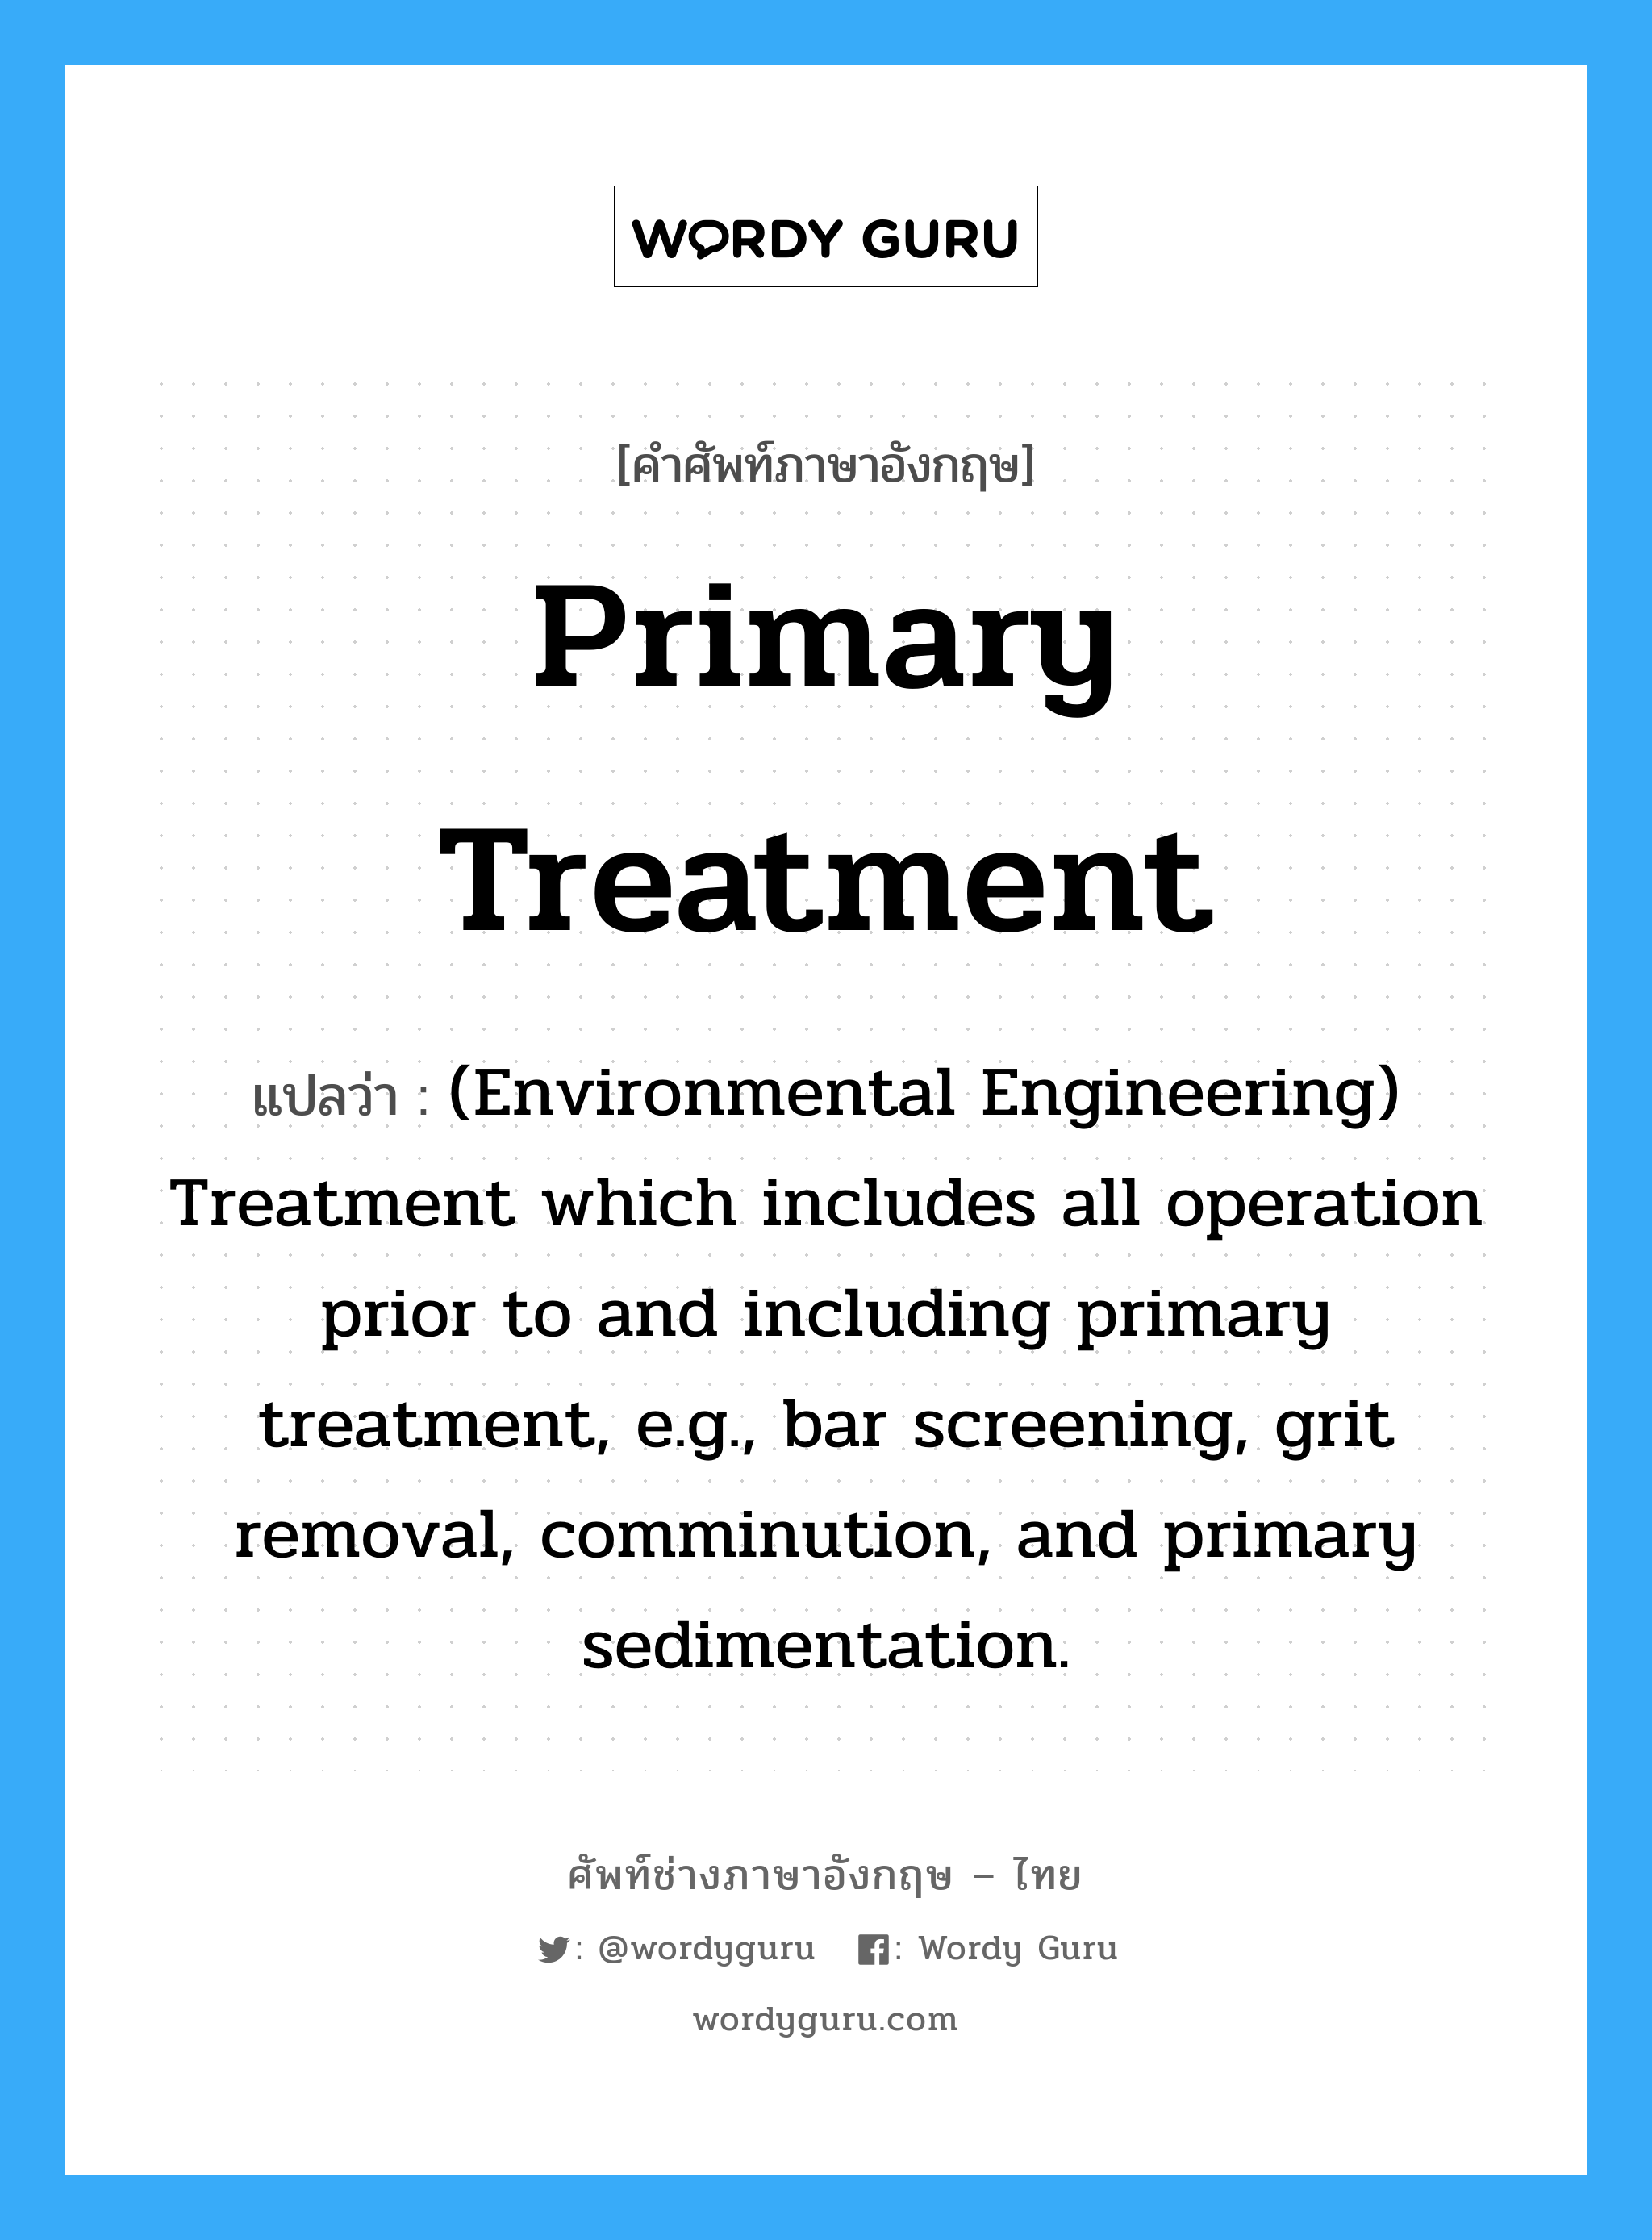 (Environmental Engineering) Treatment which includes all operation prior to and including primary treatment, e.g., bar screening, grit removal, comminution, and primary sedimentation. ภาษาอังกฤษ?, คำศัพท์ช่างภาษาอังกฤษ - ไทย (Environmental Engineering) Treatment which includes all operation prior to and including primary treatment, e.g., bar screening, grit removal, comminution, and primary sedimentation. คำศัพท์ภาษาอังกฤษ (Environmental Engineering) Treatment which includes all operation prior to and including primary treatment, e.g., bar screening, grit removal, comminution, and primary sedimentation. แปลว่า Primary treatment